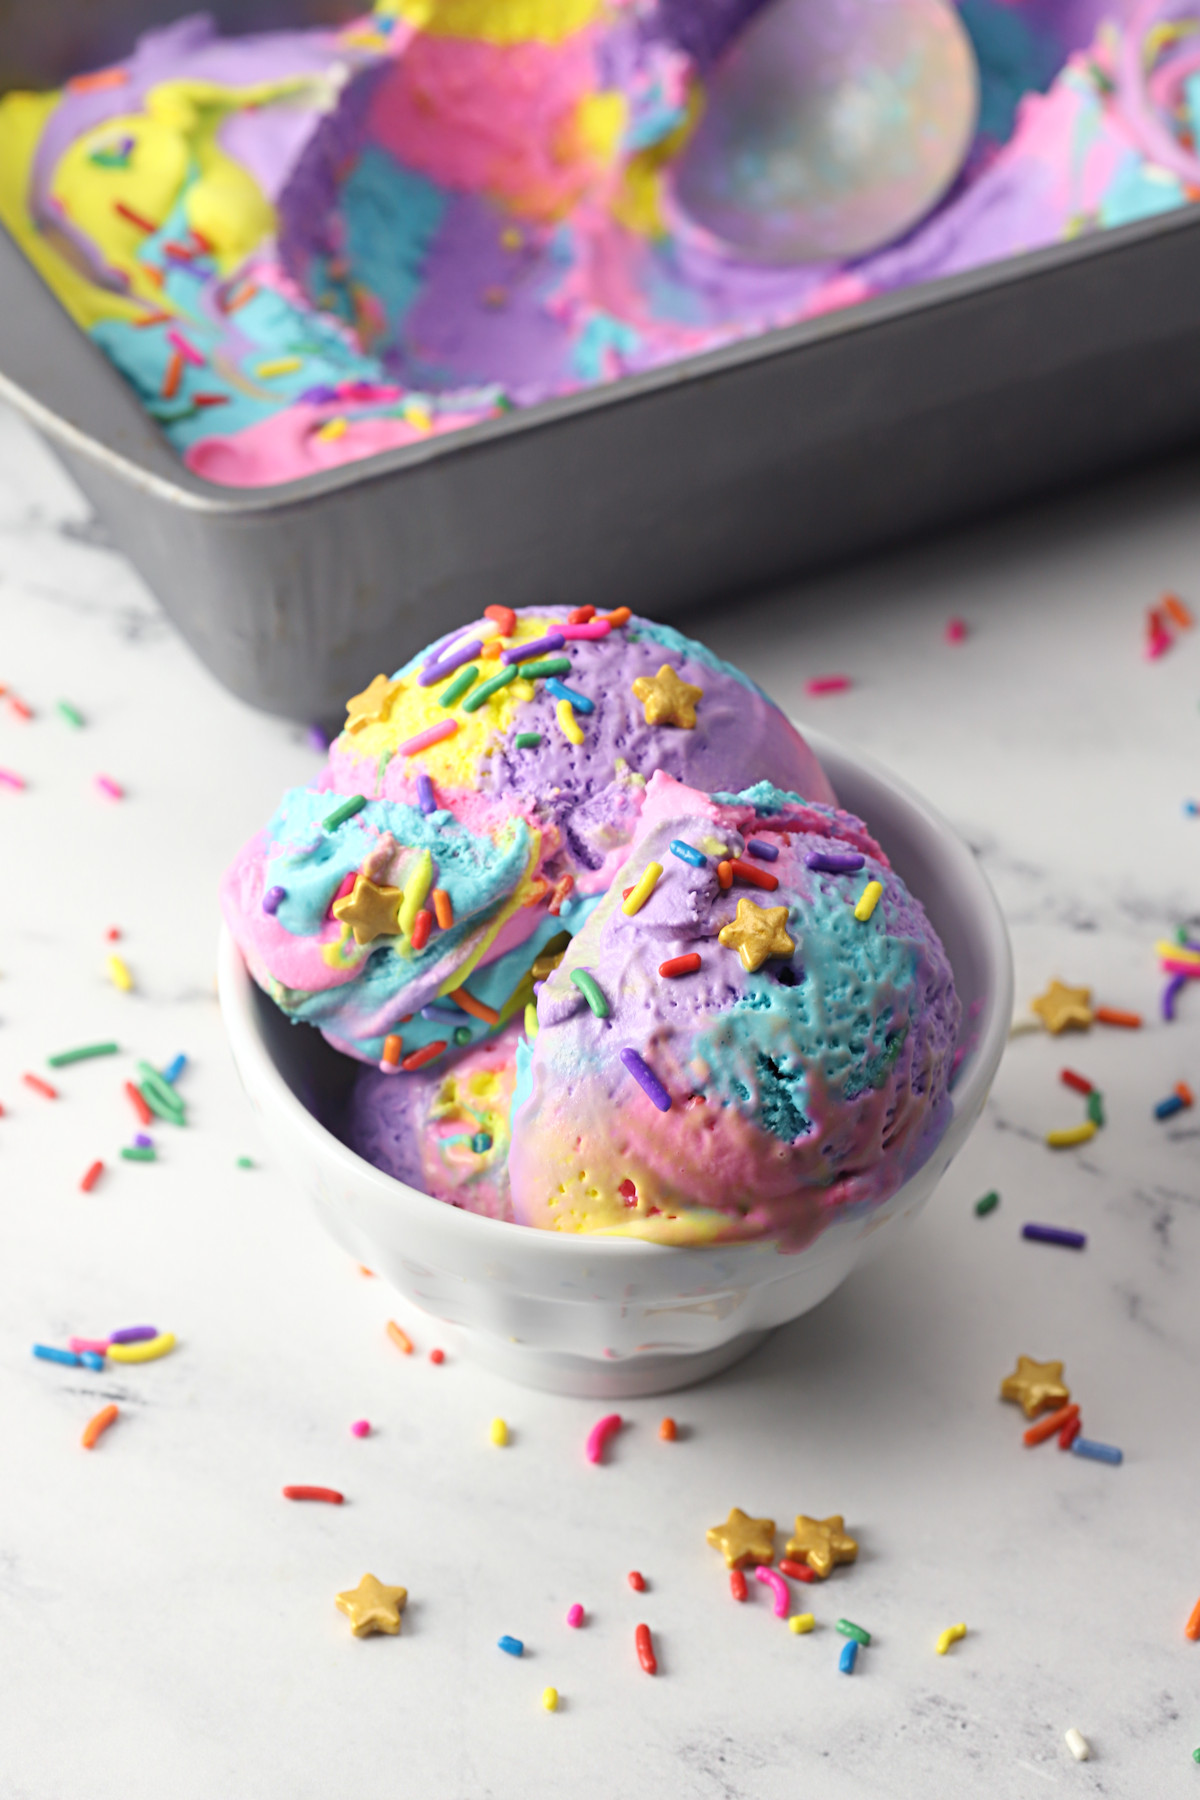 A pan of frozen unicorn ice cream alongside a white bowl filled with ice cream.